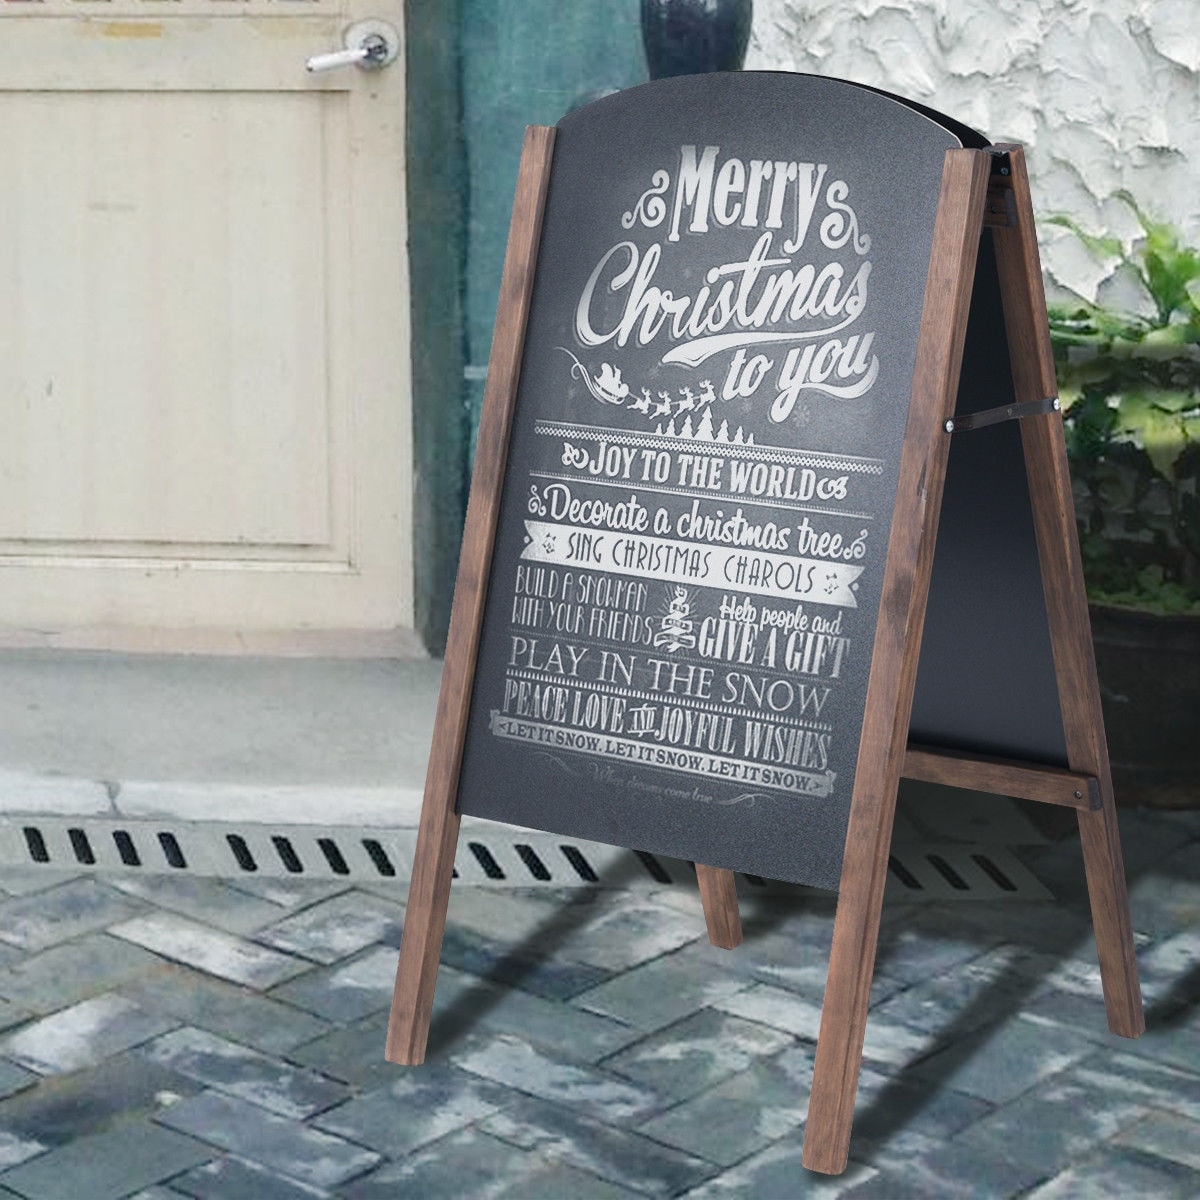 UNIQOOO Set of 4 Chalkboard Signs with Rustic Wood Stands Tabletop Chalk Board Menu Sign for Wedding Cafe Bakery Restaurant Retail Shop